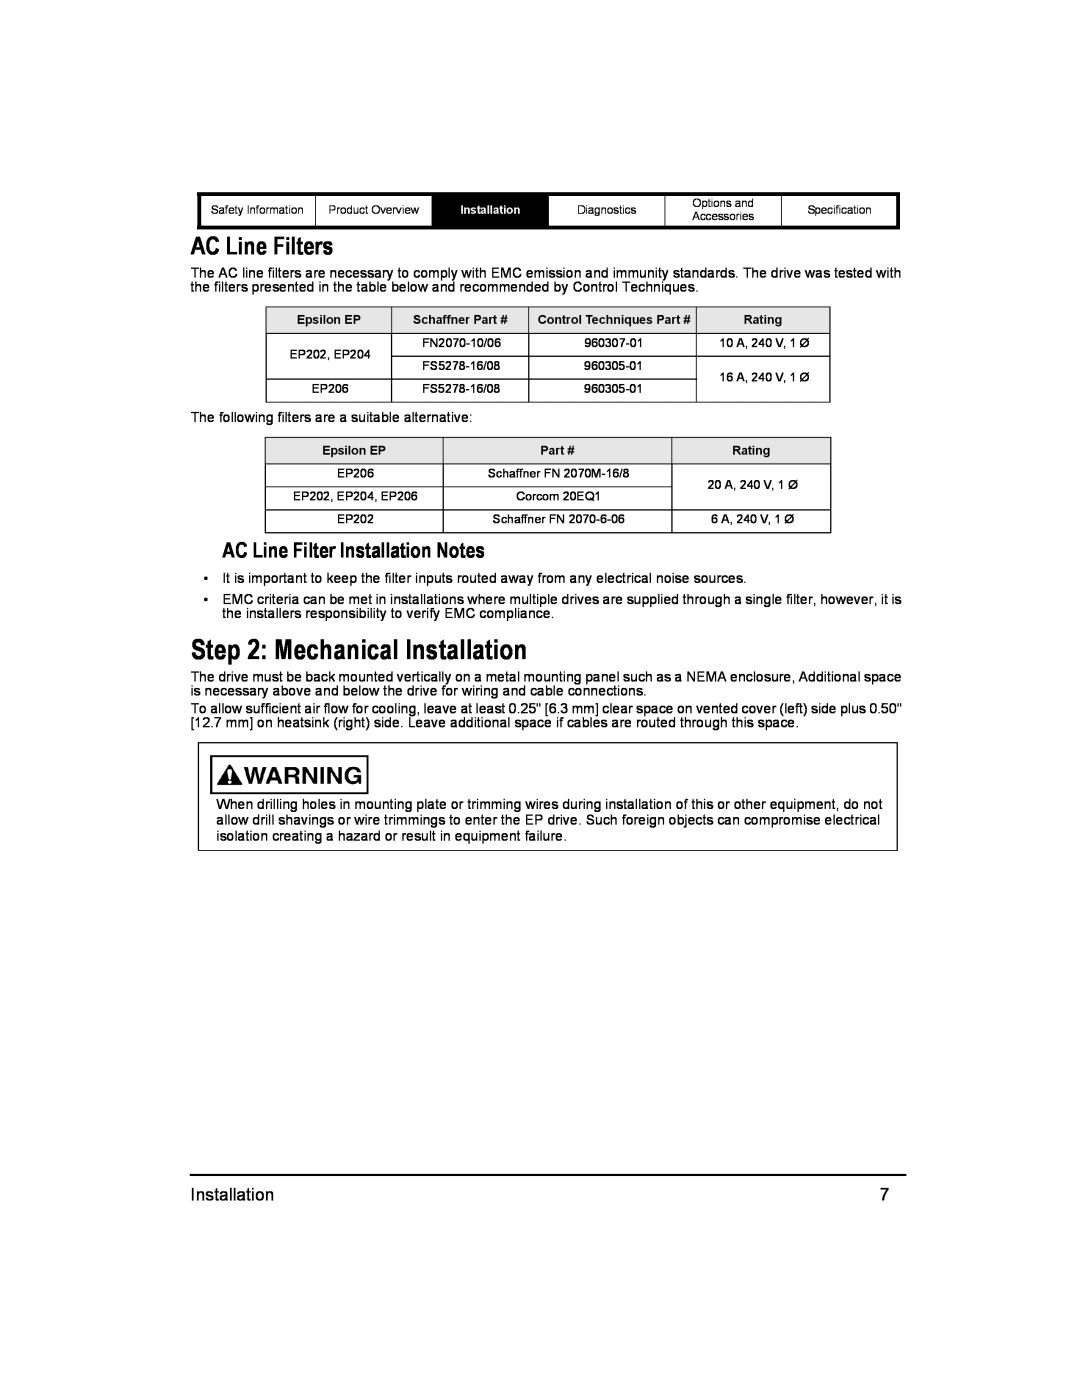 Emerson 400518-01 installation manual Mechanical Installation, AC Line Filters, AC Line Filter Installation Notes 